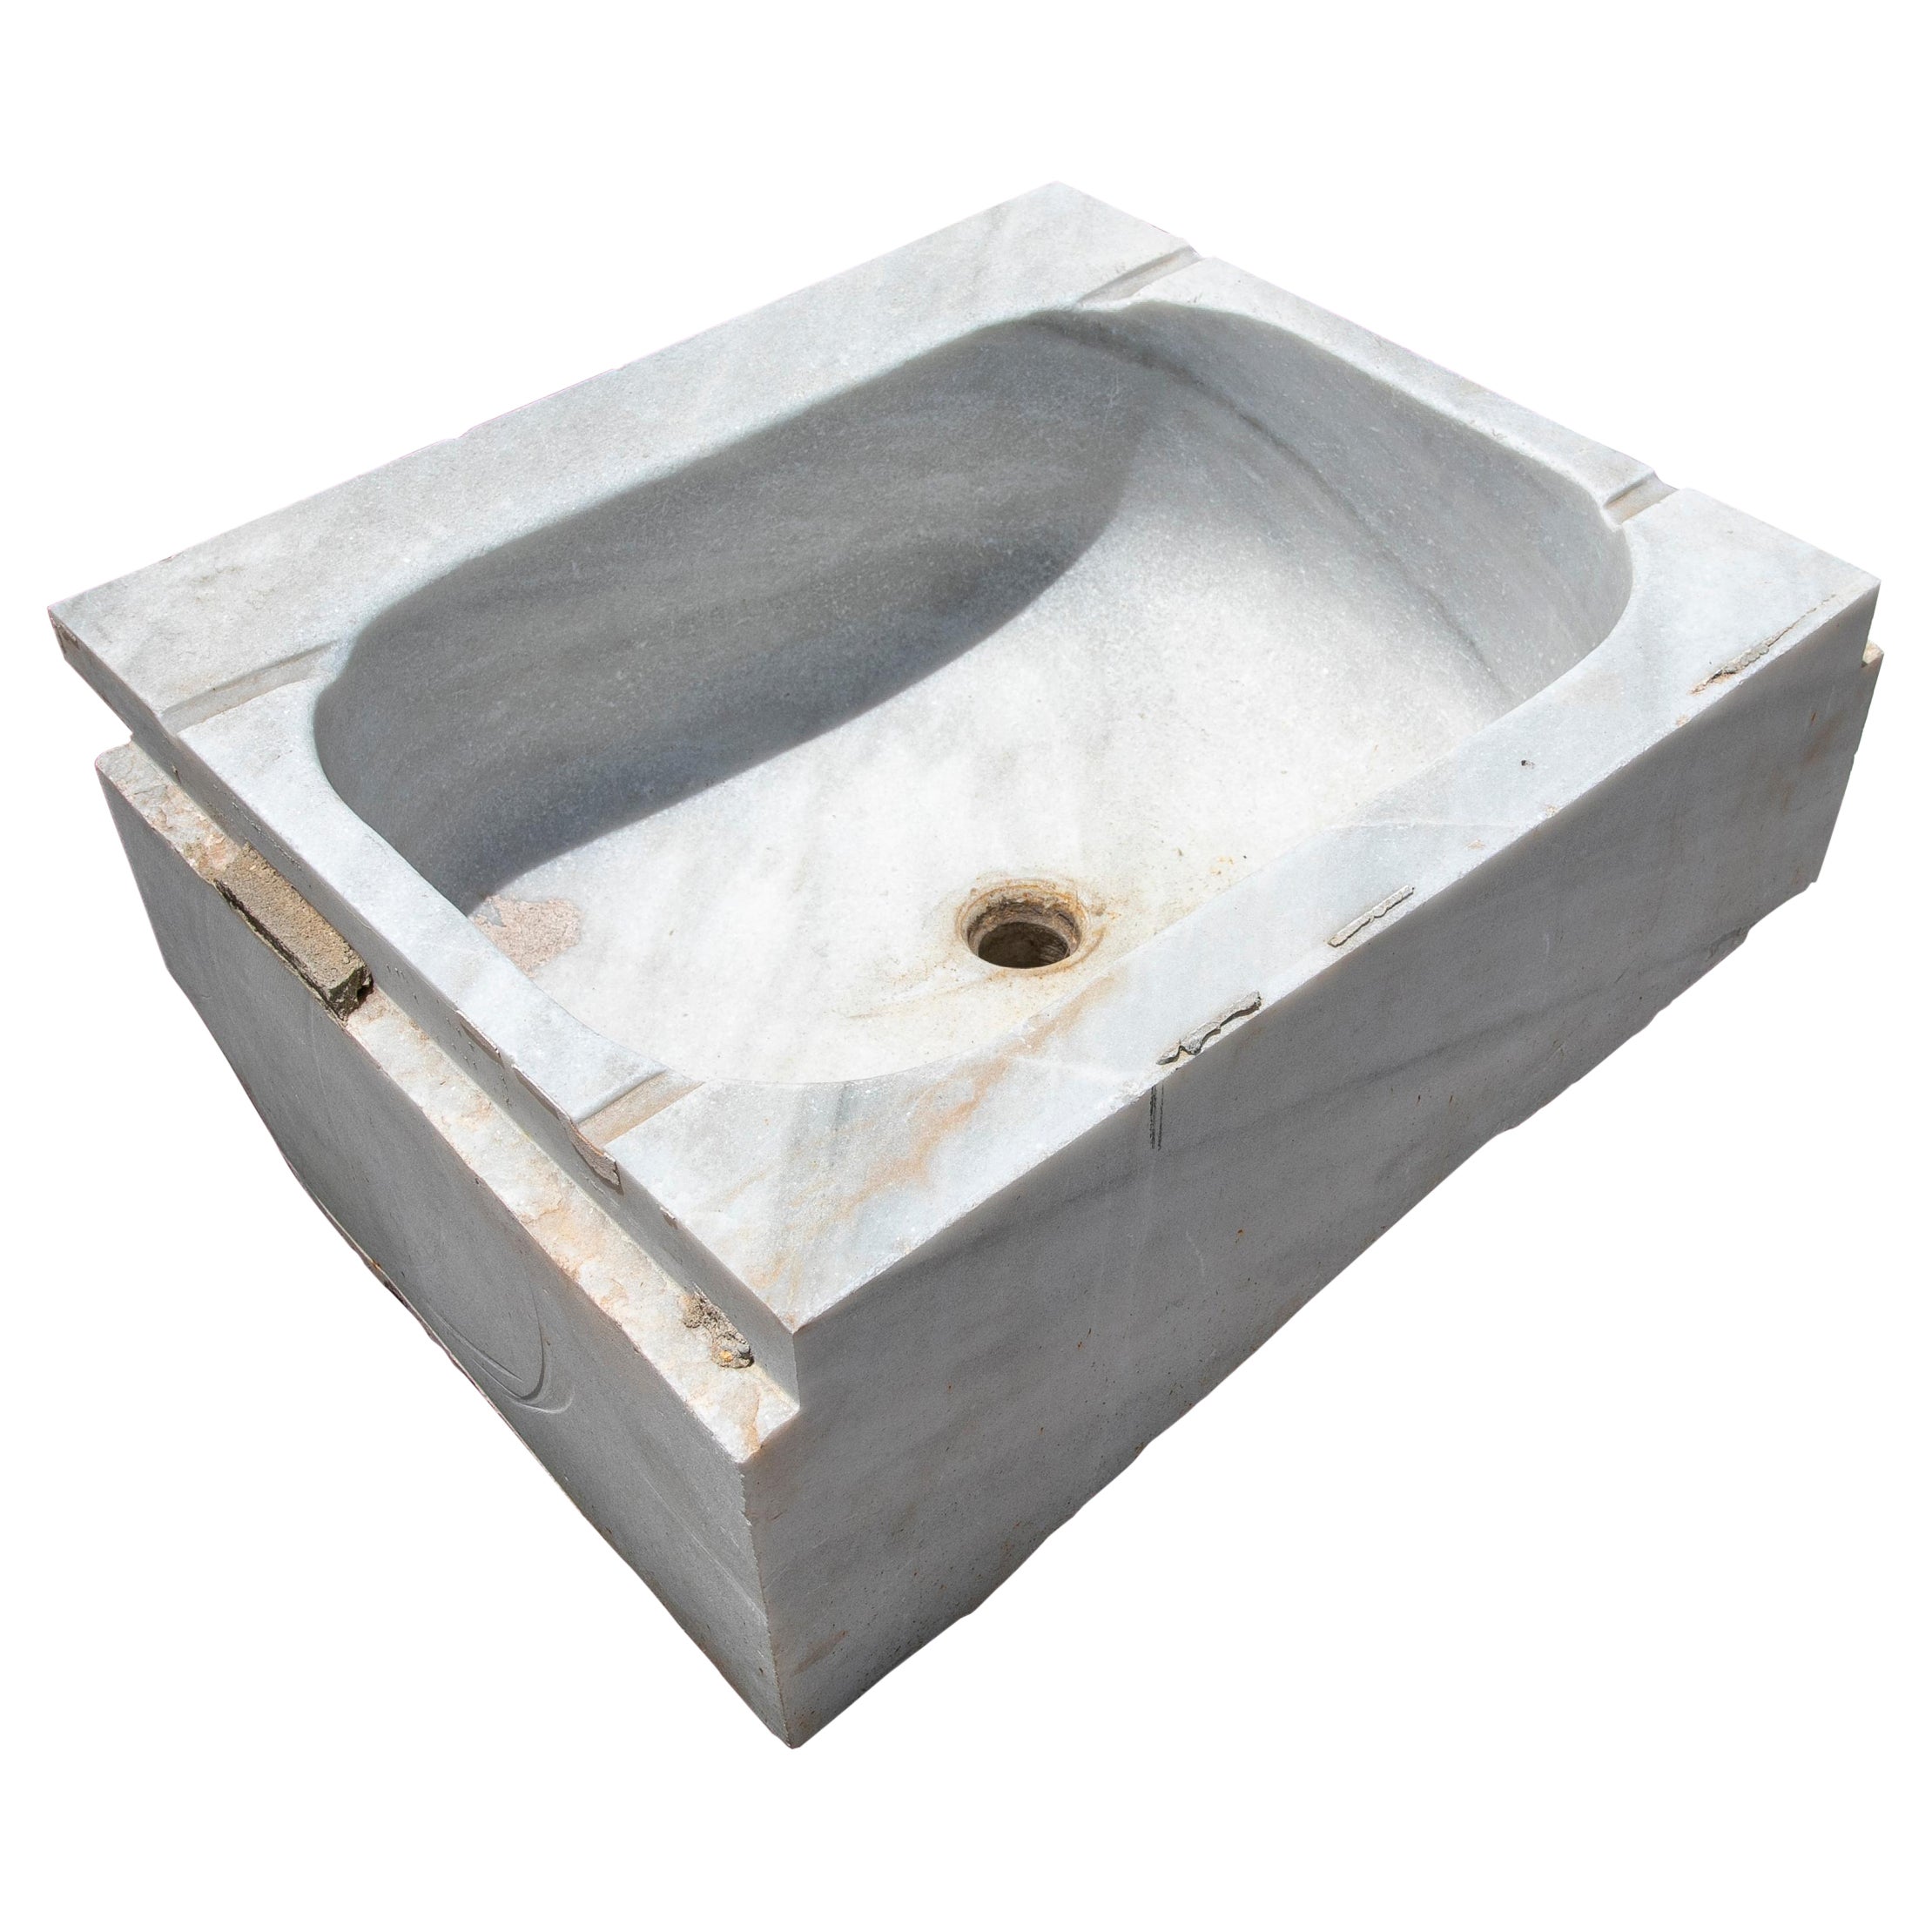 19th Century Antique Spanish White Marble Sink For Sale at 1stDibs